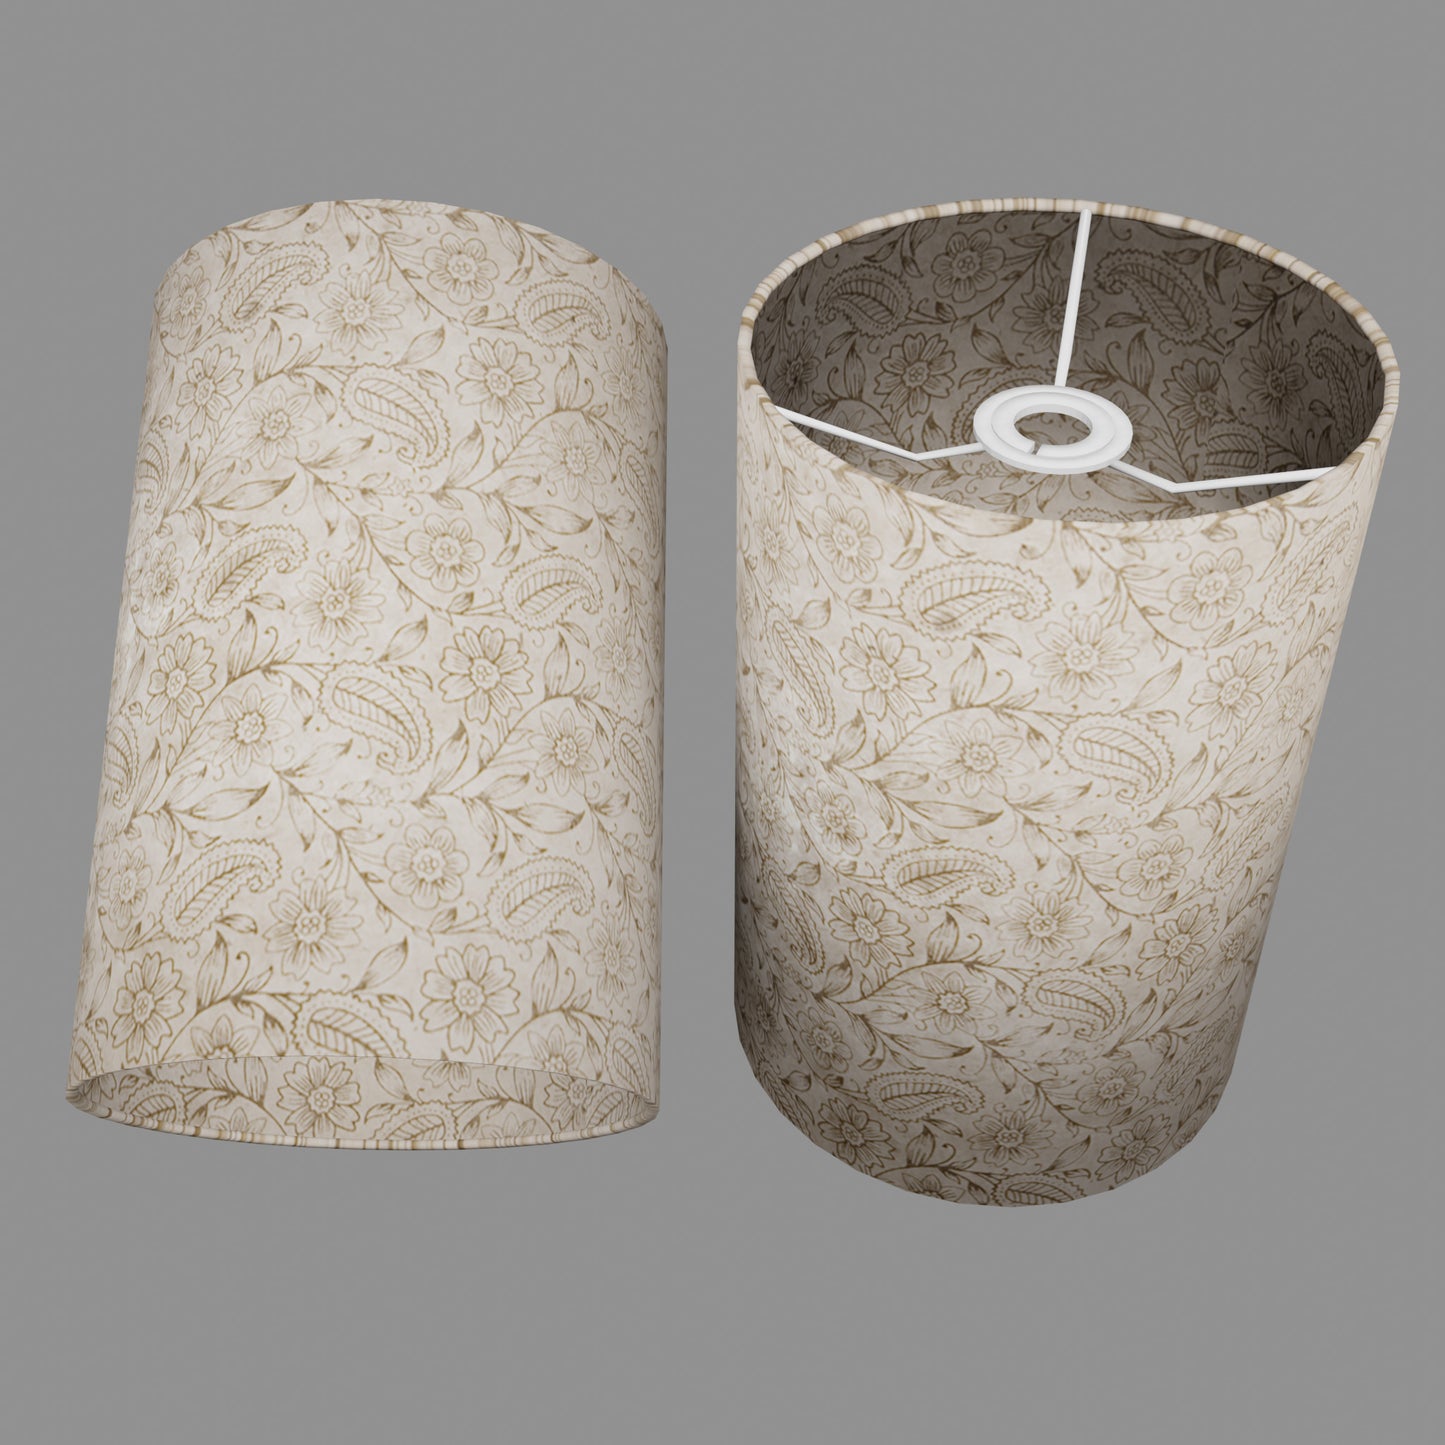 Drum Lamp Shade - P69 - Garden Gold on Natural, 20cm(d) x 30cm(h)